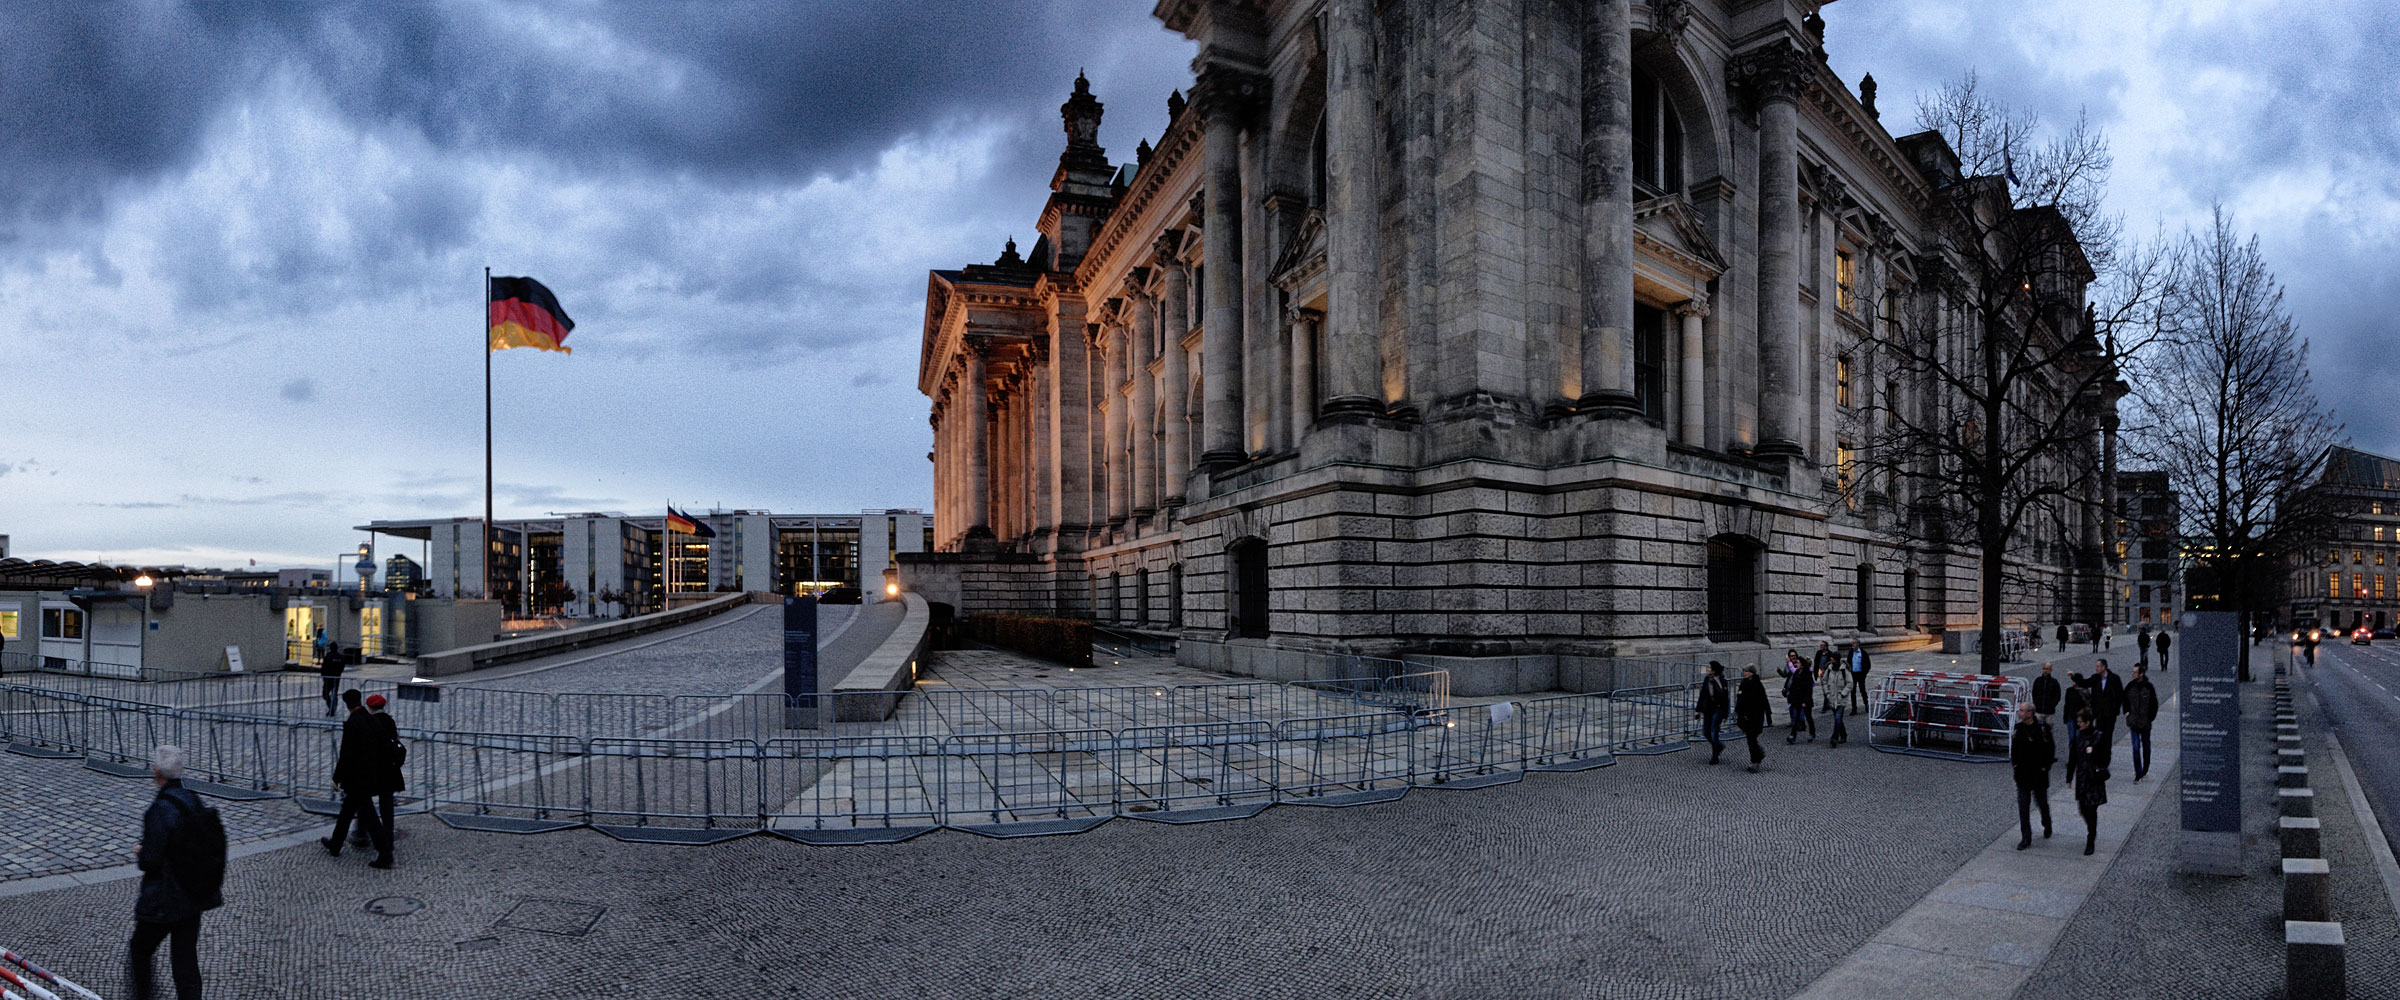 PANORAMA DIARY | Iphoneography blog | Berlin Reichstag